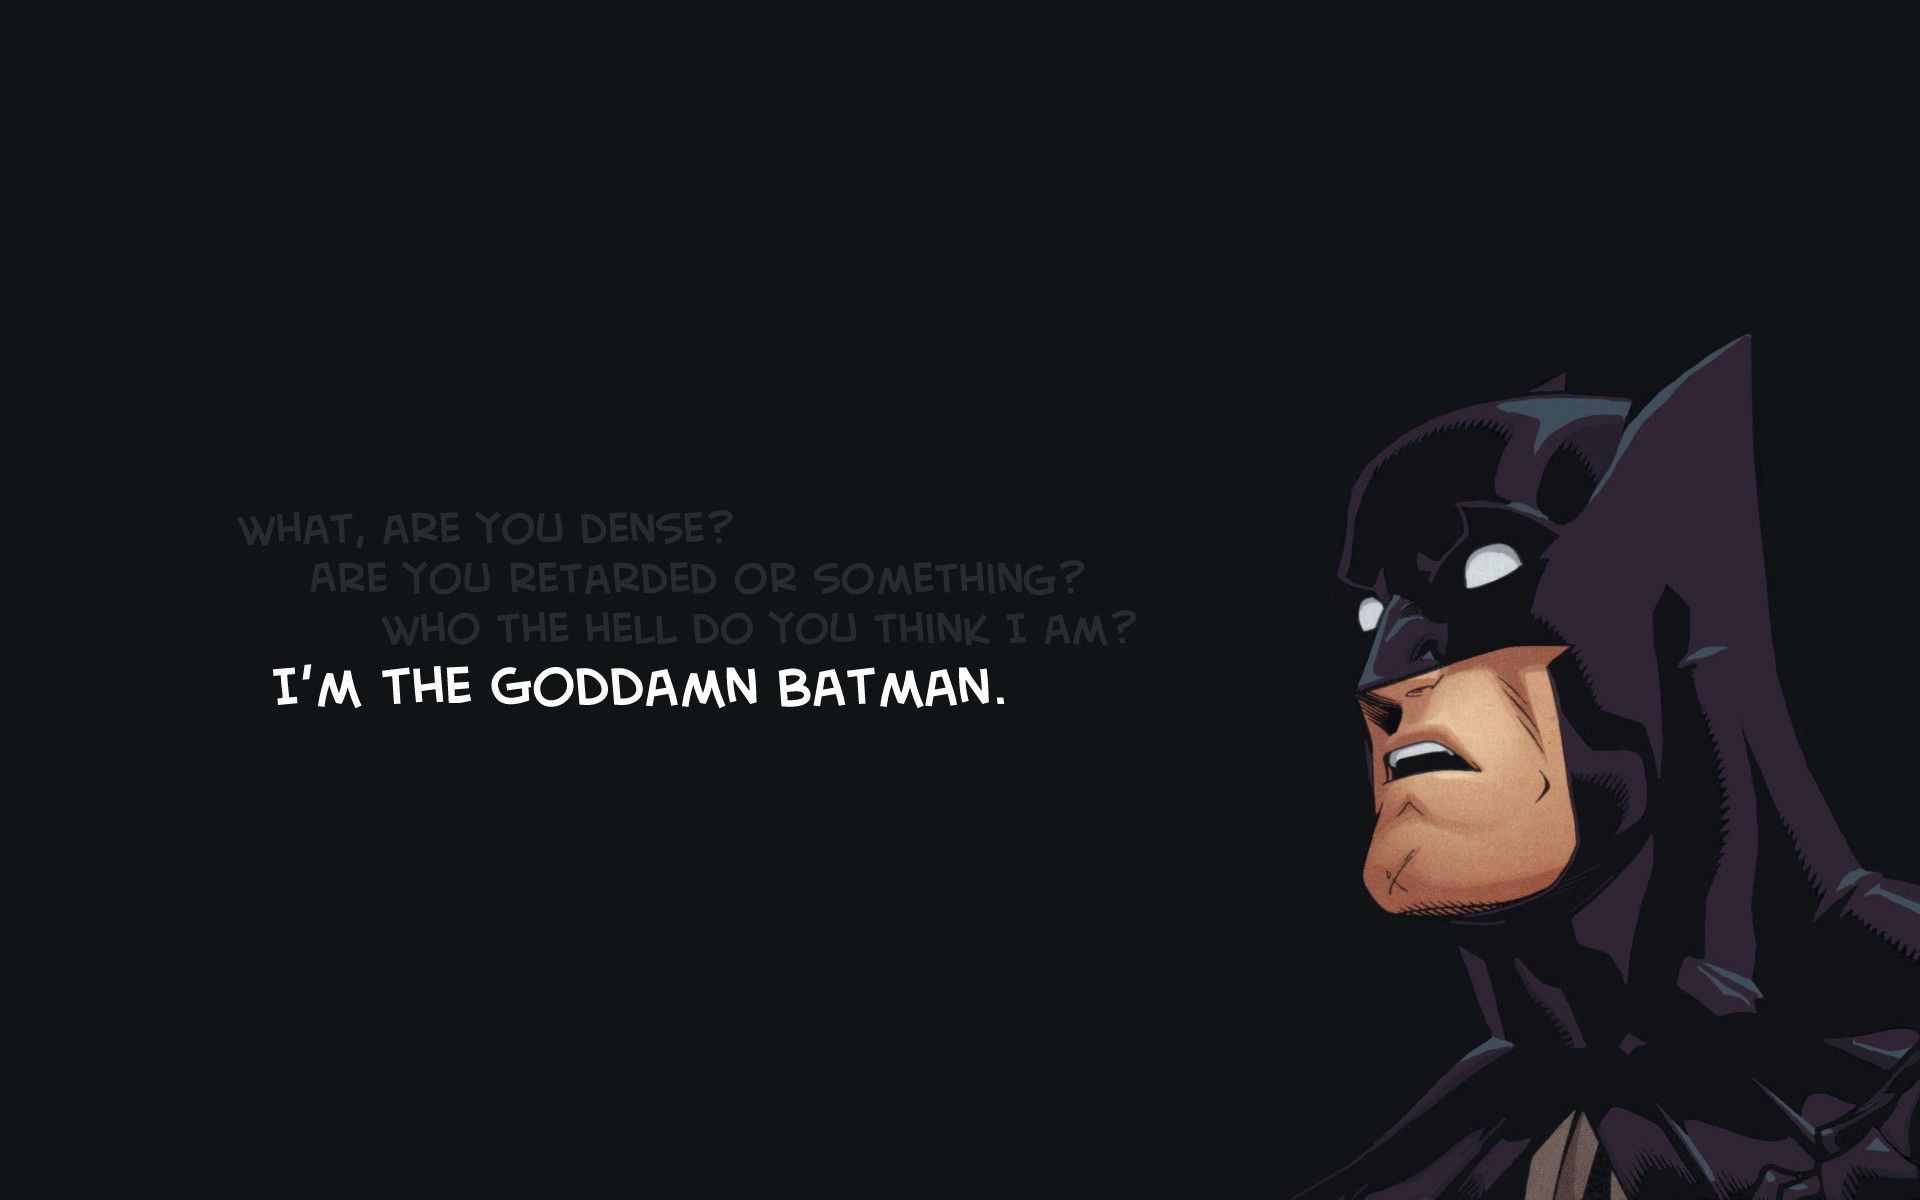 Batman Famous Quotes With Image Magment